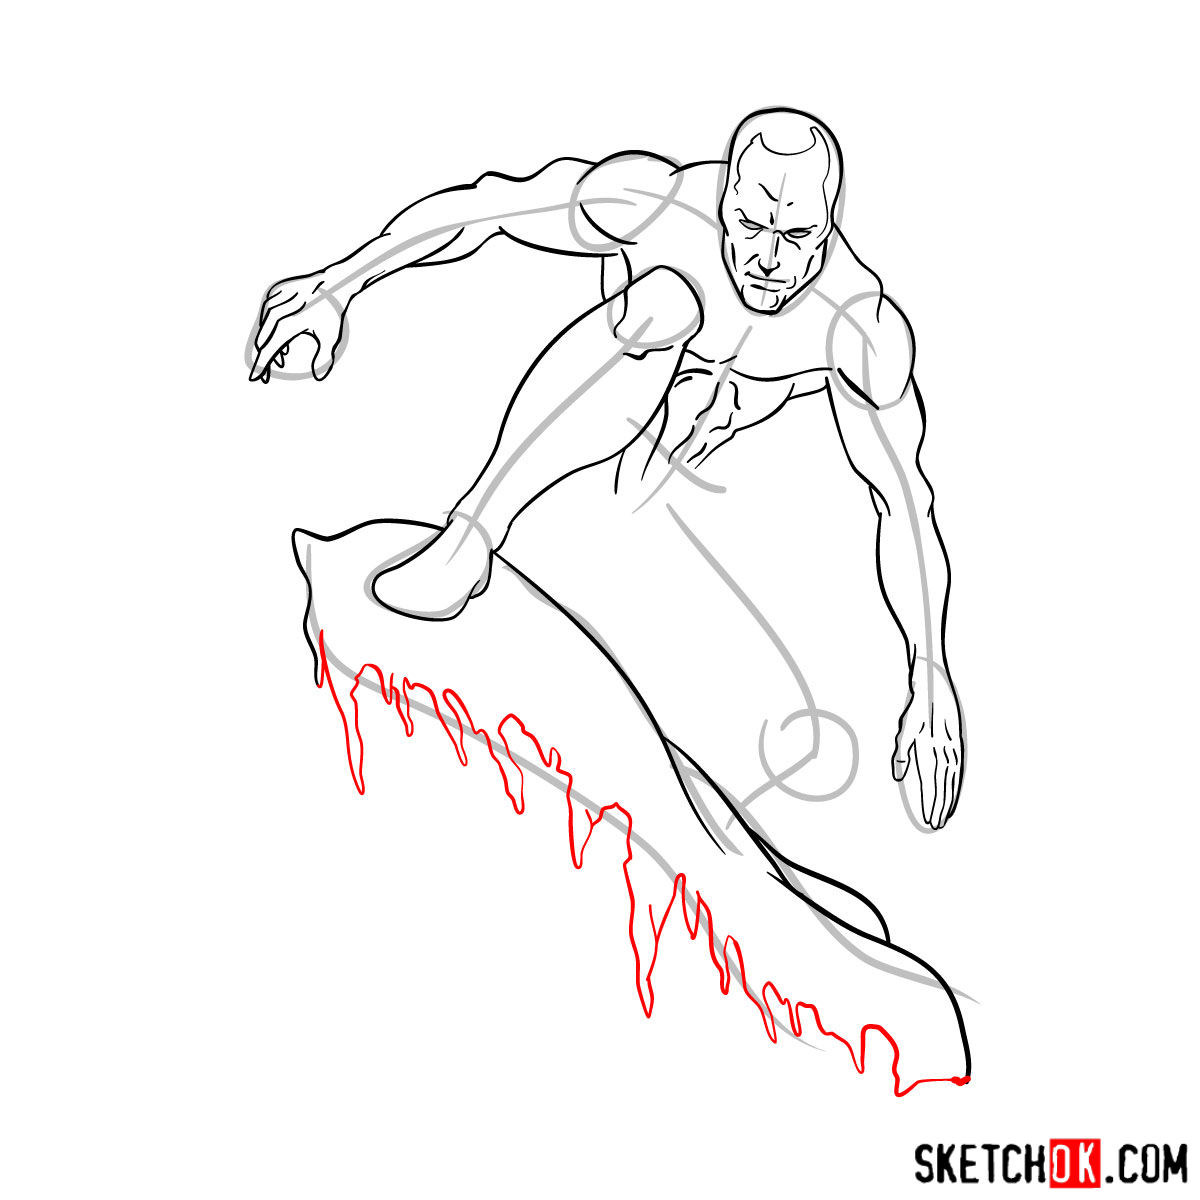 How to draw Iceman - step by step drawing tutorial - step 10